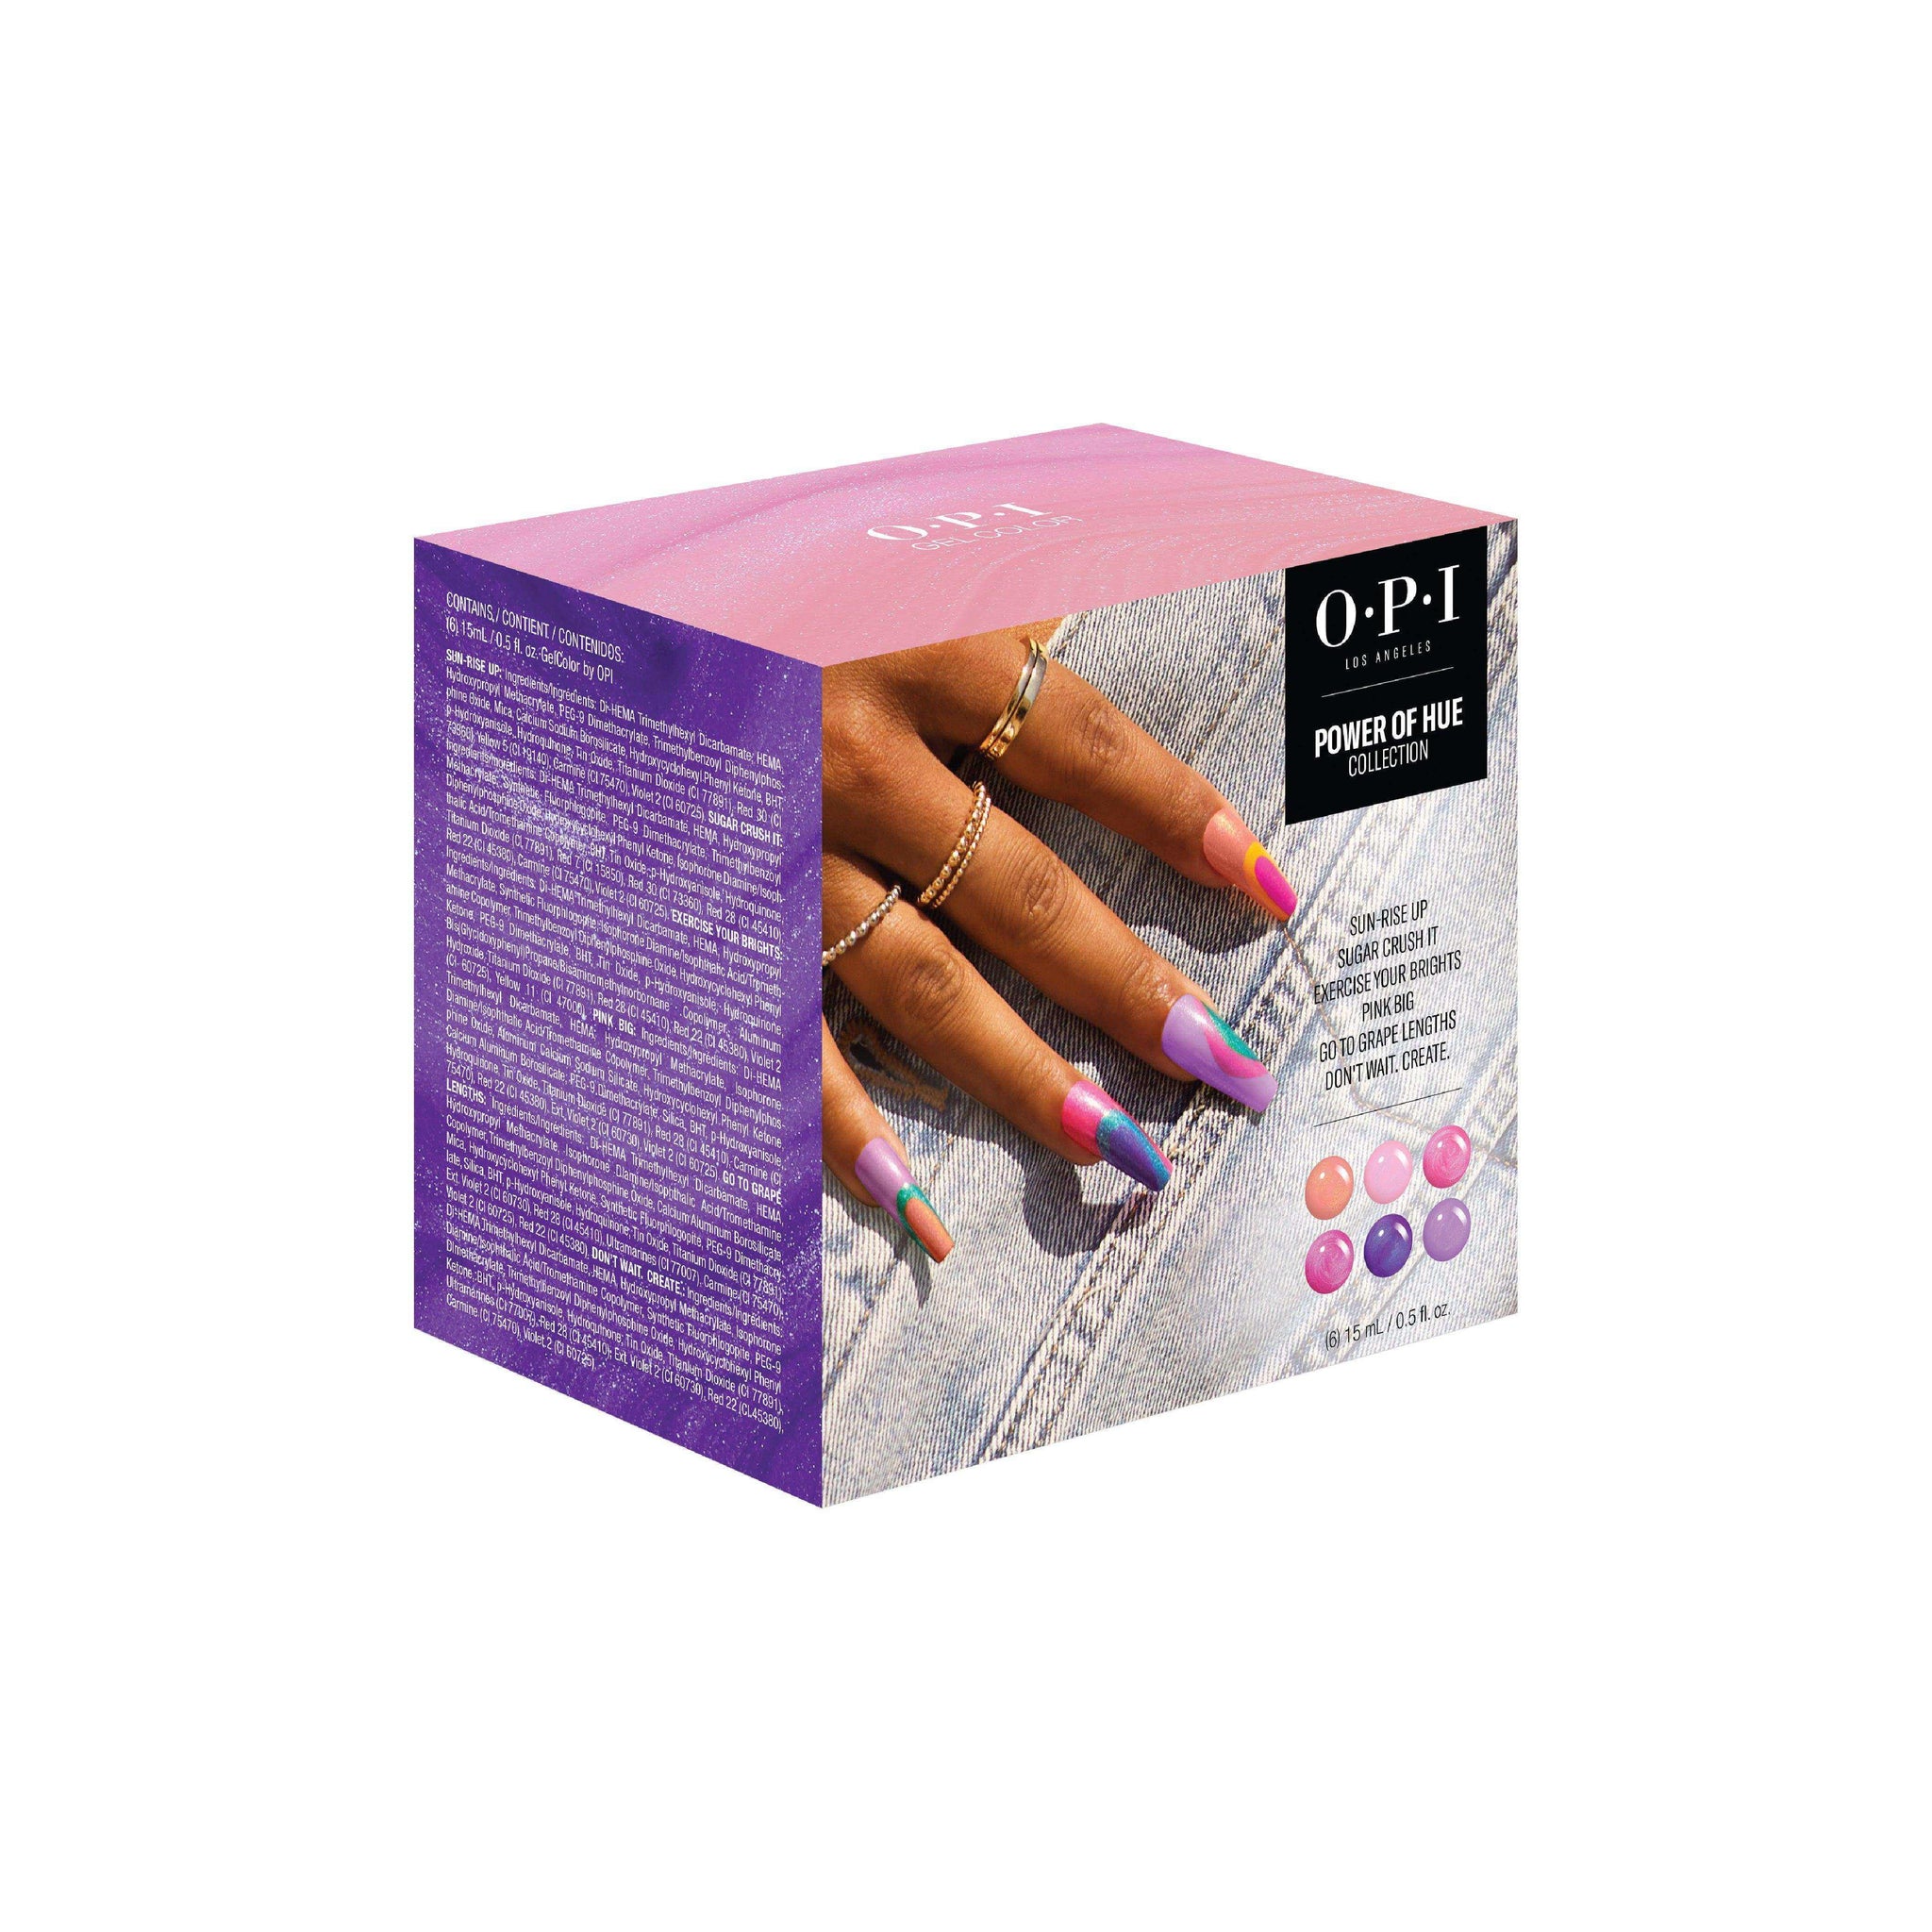 OPI Summer 2022 - Power of Hue Collection - GelColor Kit A 6pc